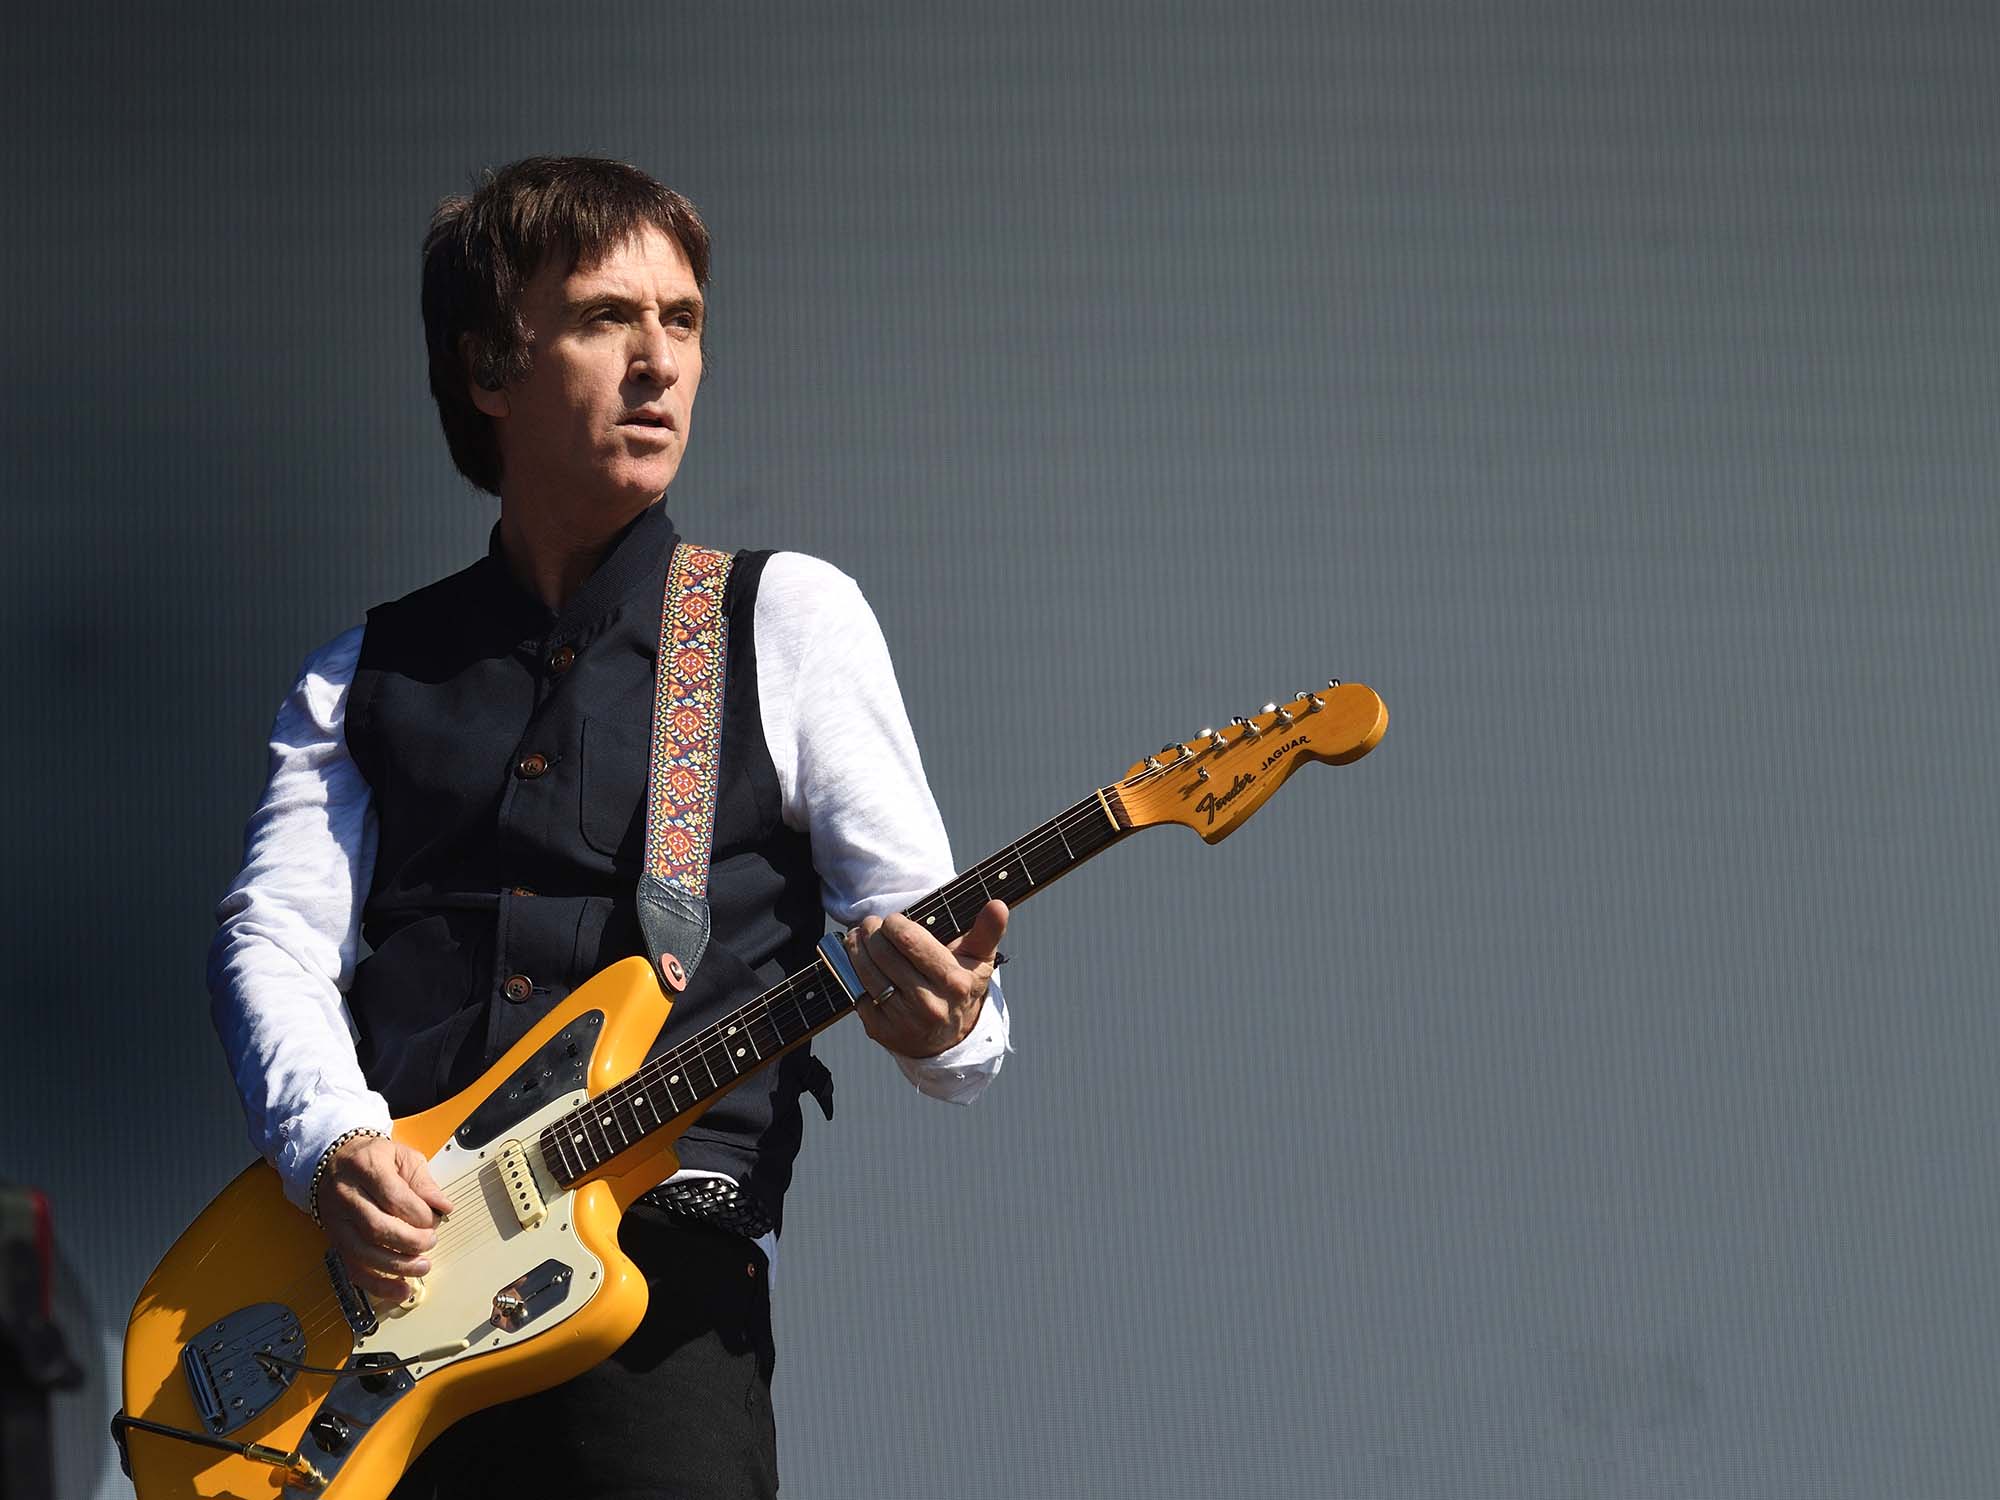 Johnny Marr playing a Jazzmaster. He is standing in front of a grey background. His guitar is a vibrant orange colour.